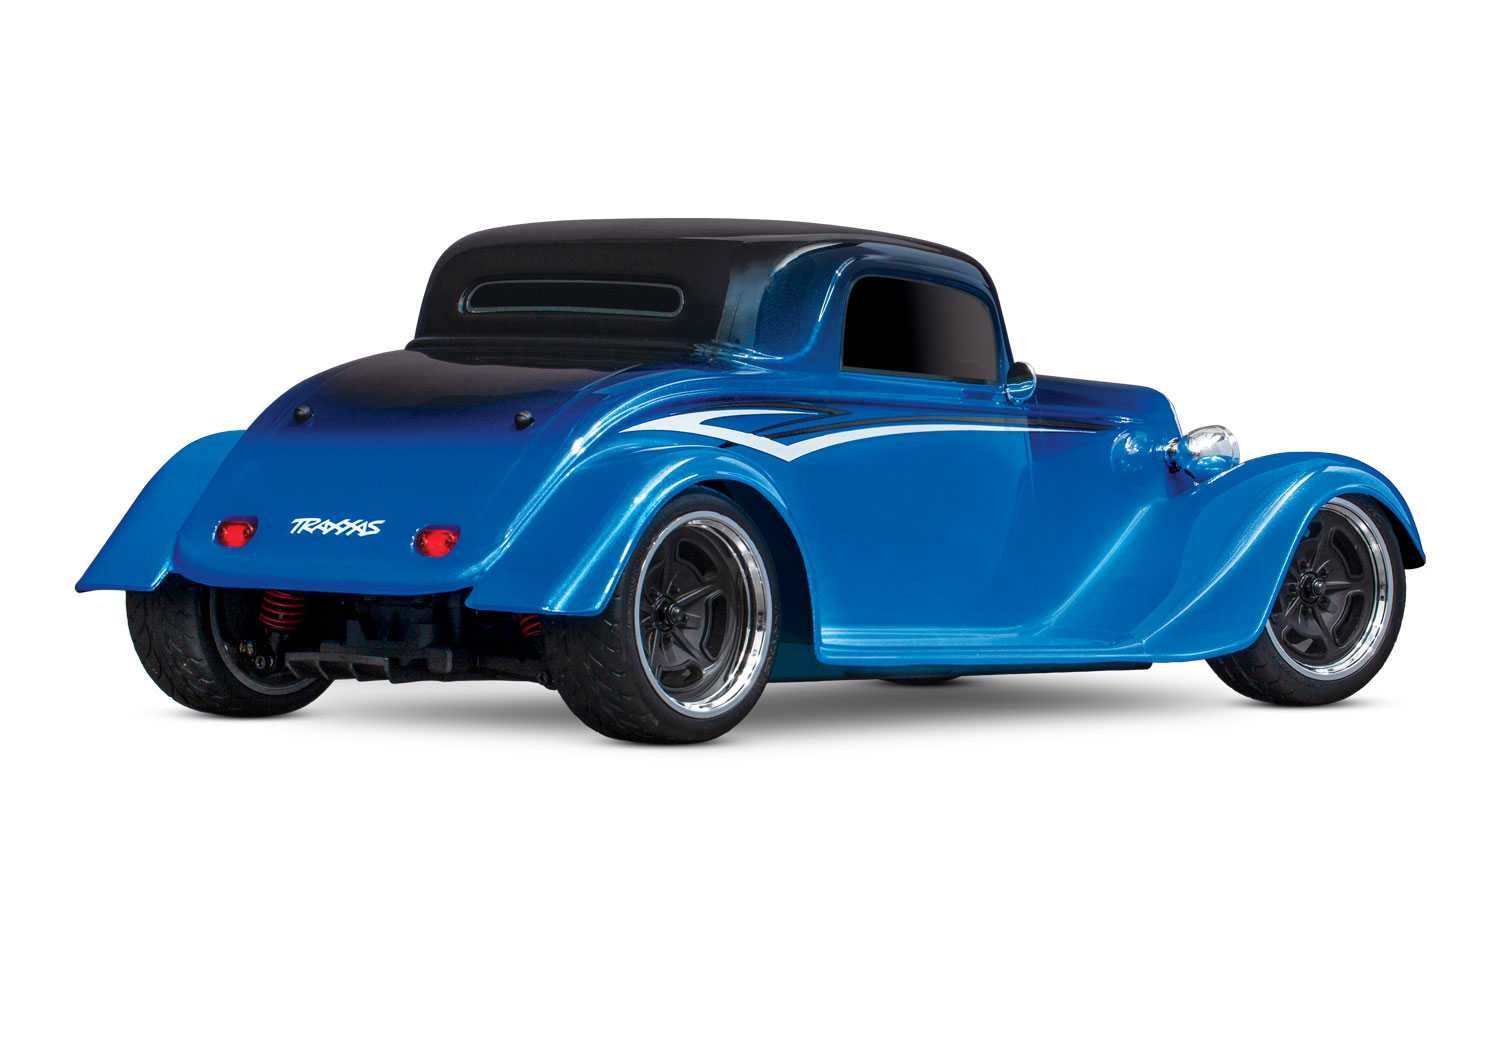 Traxxas Factory Five 1935 Hot Rod Coupe